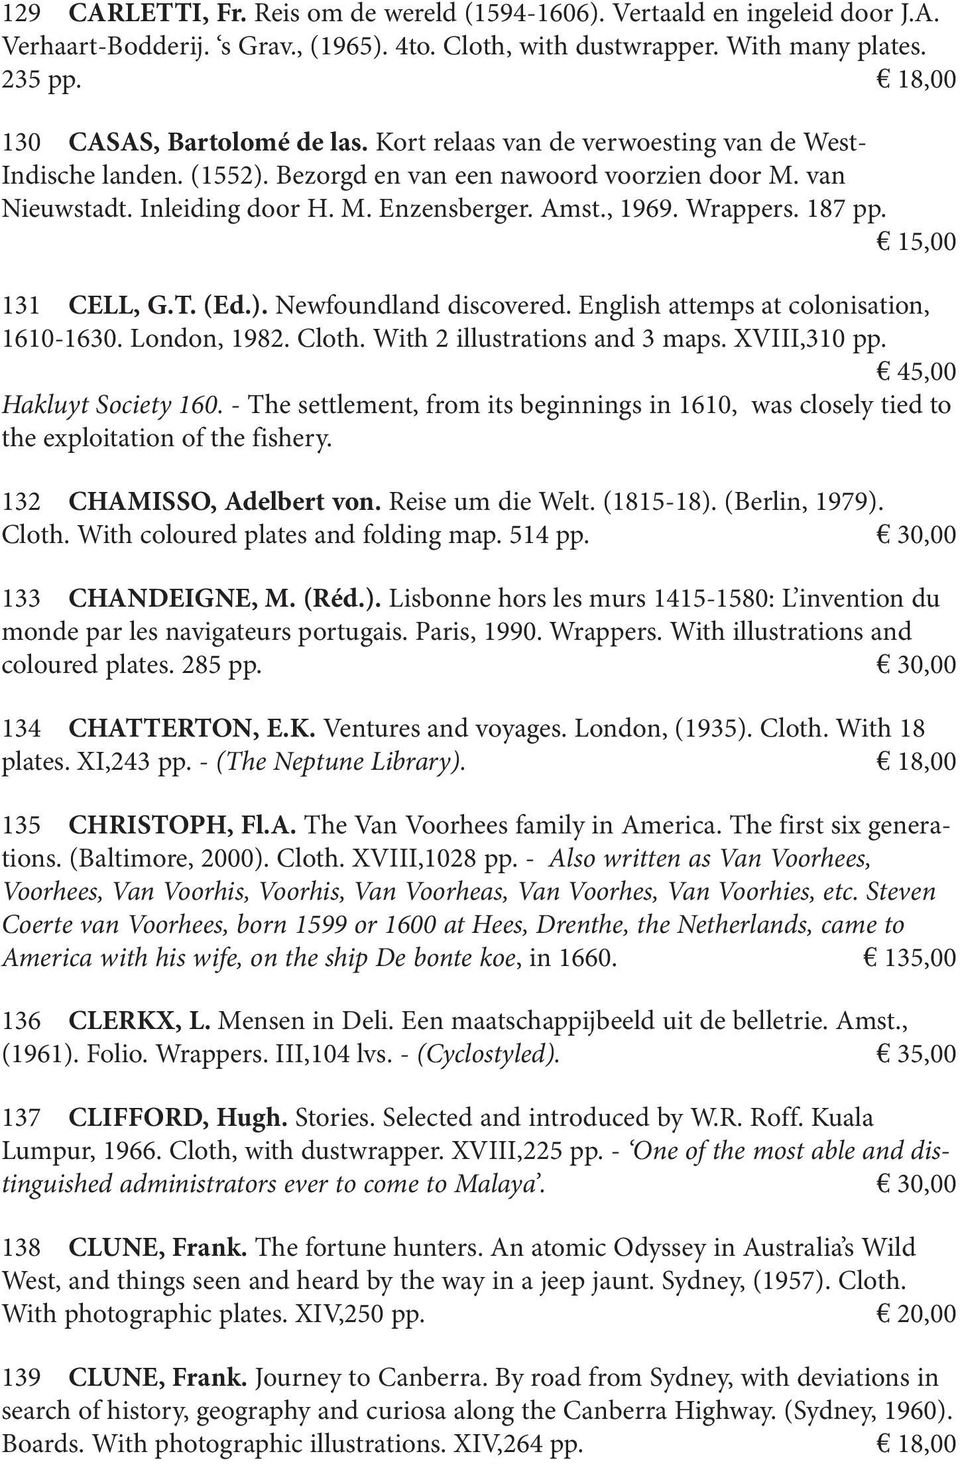 Amst., 1969. Wrappers. 187 pp. 15,00 131 CELL, G.T. (Ed.). Newfoundland discovered. English attemps at colonisation, 1610-1630. London, 1982. Cloth. With 2 illustrations and 3 maps. XVIII,310 pp.